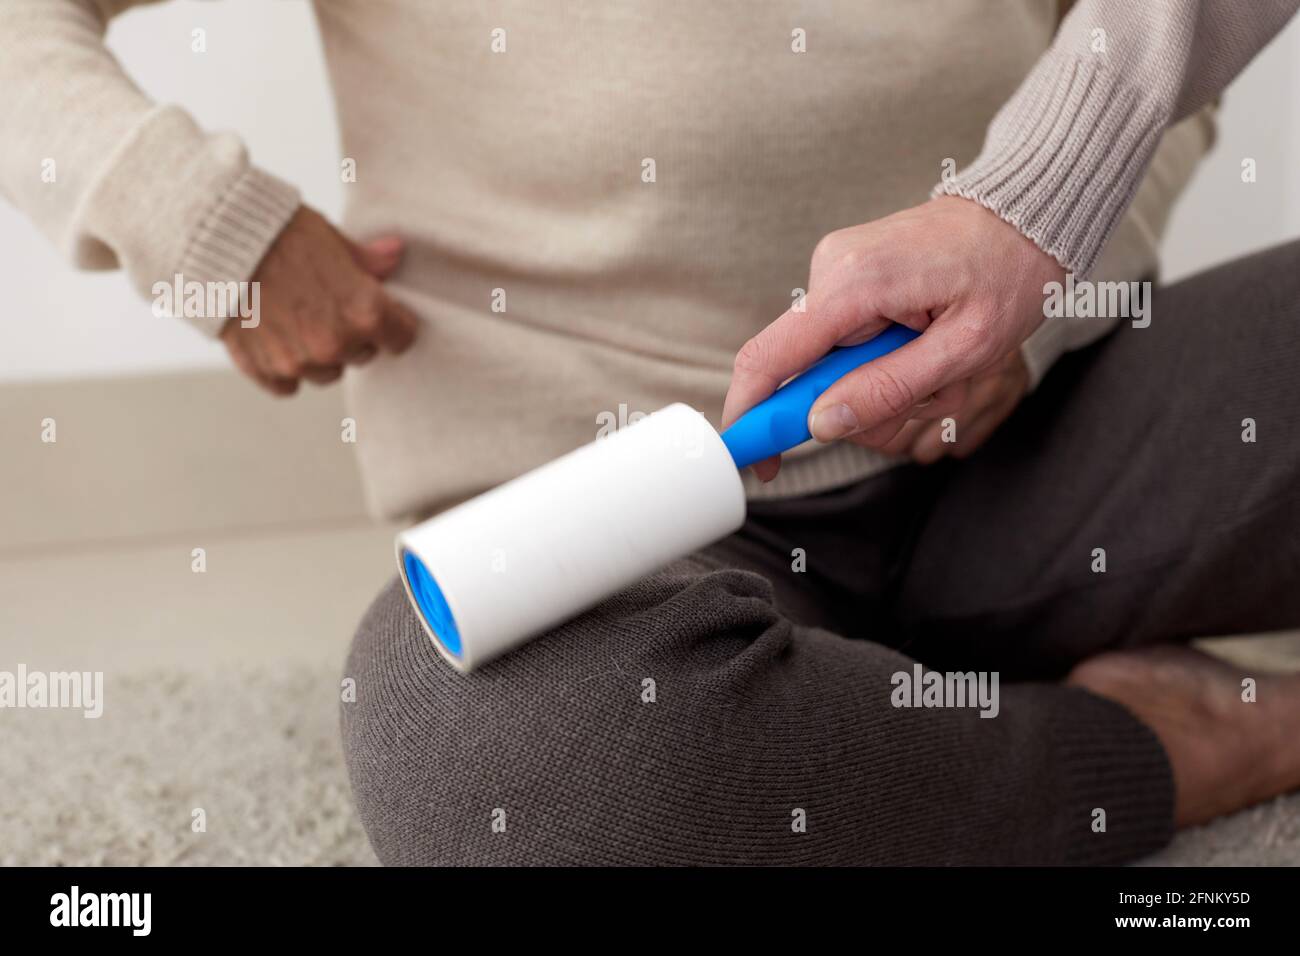 Crop unrecognizable person helping woman and cleaning her clothes with lint roller at home Stock Photo